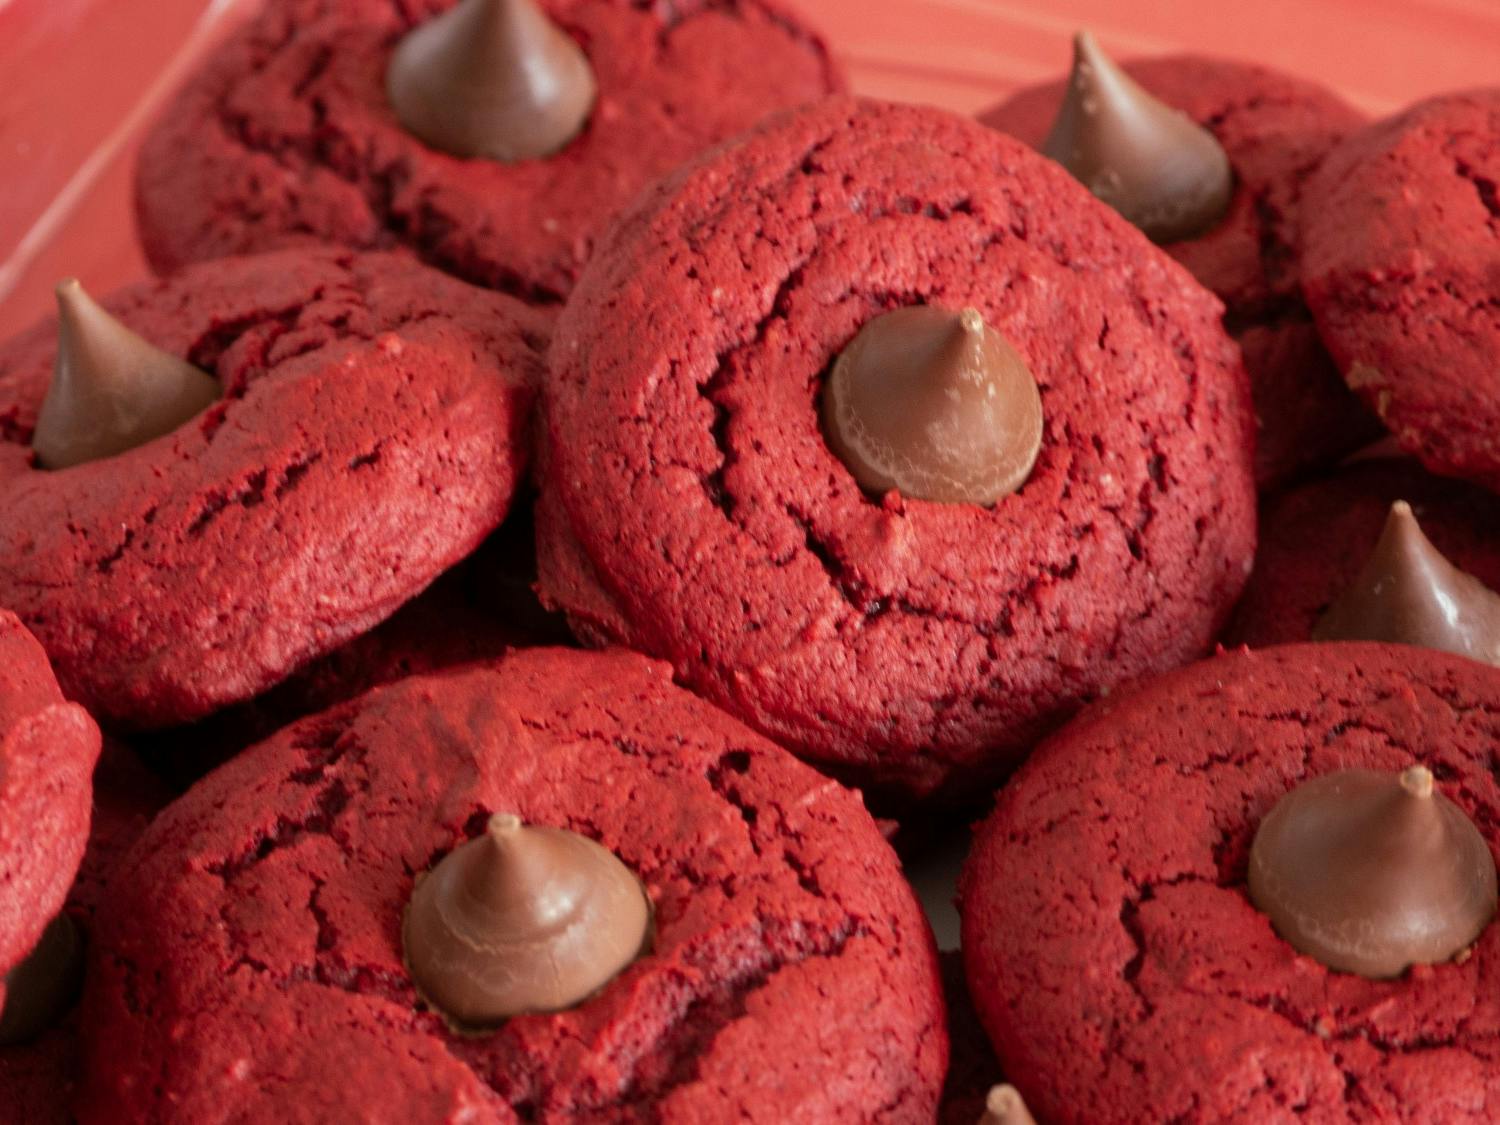 GALLERY: Valentine's Day recipes to fall in love with